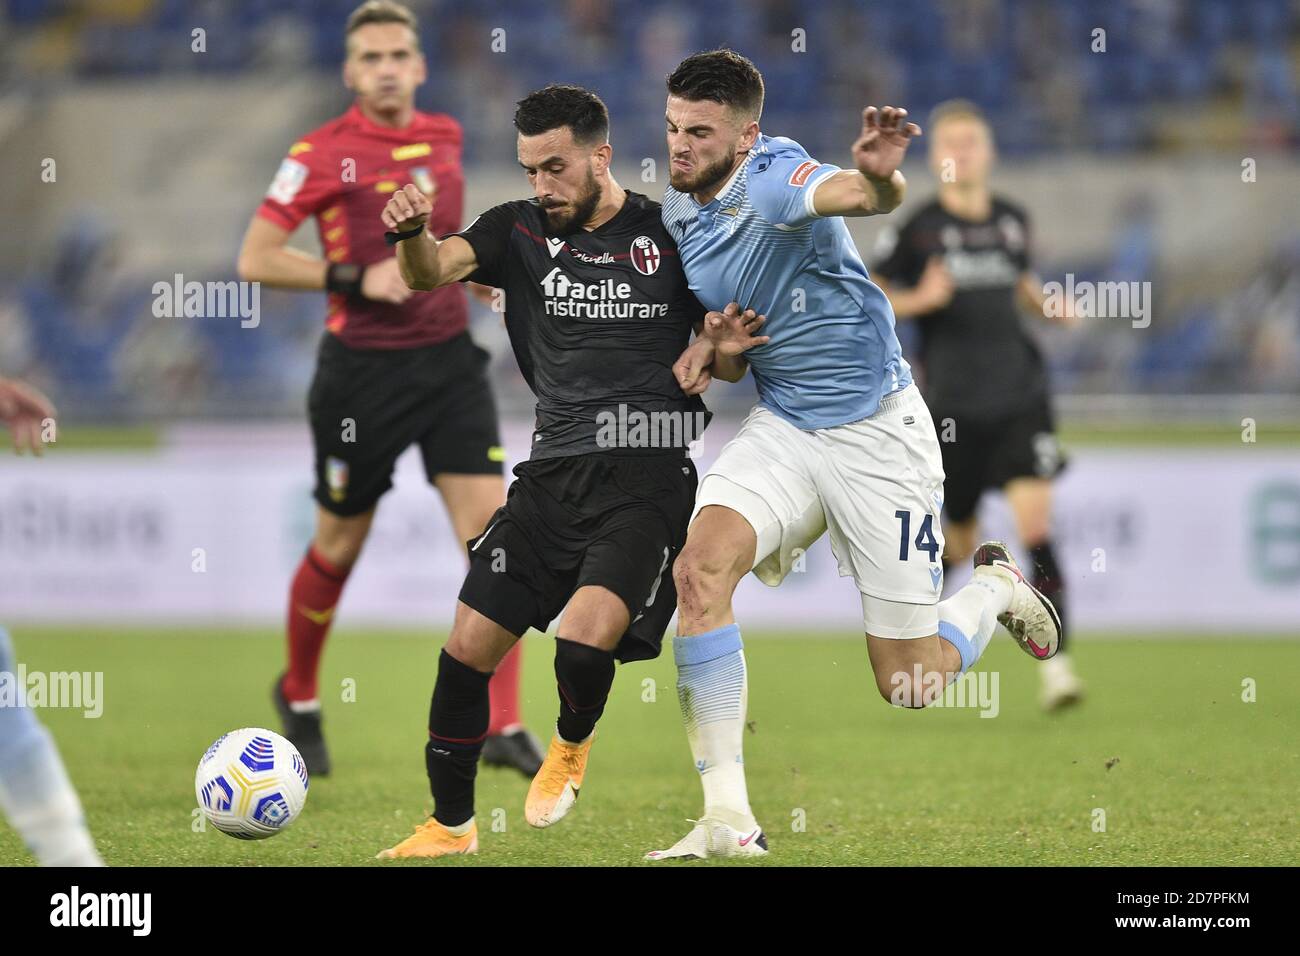 ROME, ITALY - October 24 Nicola Sansone (L) of Bologna FC in action against  Wesley Hodet (R) of Lazio during the Serie A soccer match between SS Lazio  Bologna FC Stadio Olimpico on October 24,2020 in Rome Italy  Credit: LM/Claudio Pasquazi/Alamy Live News Stock Photo